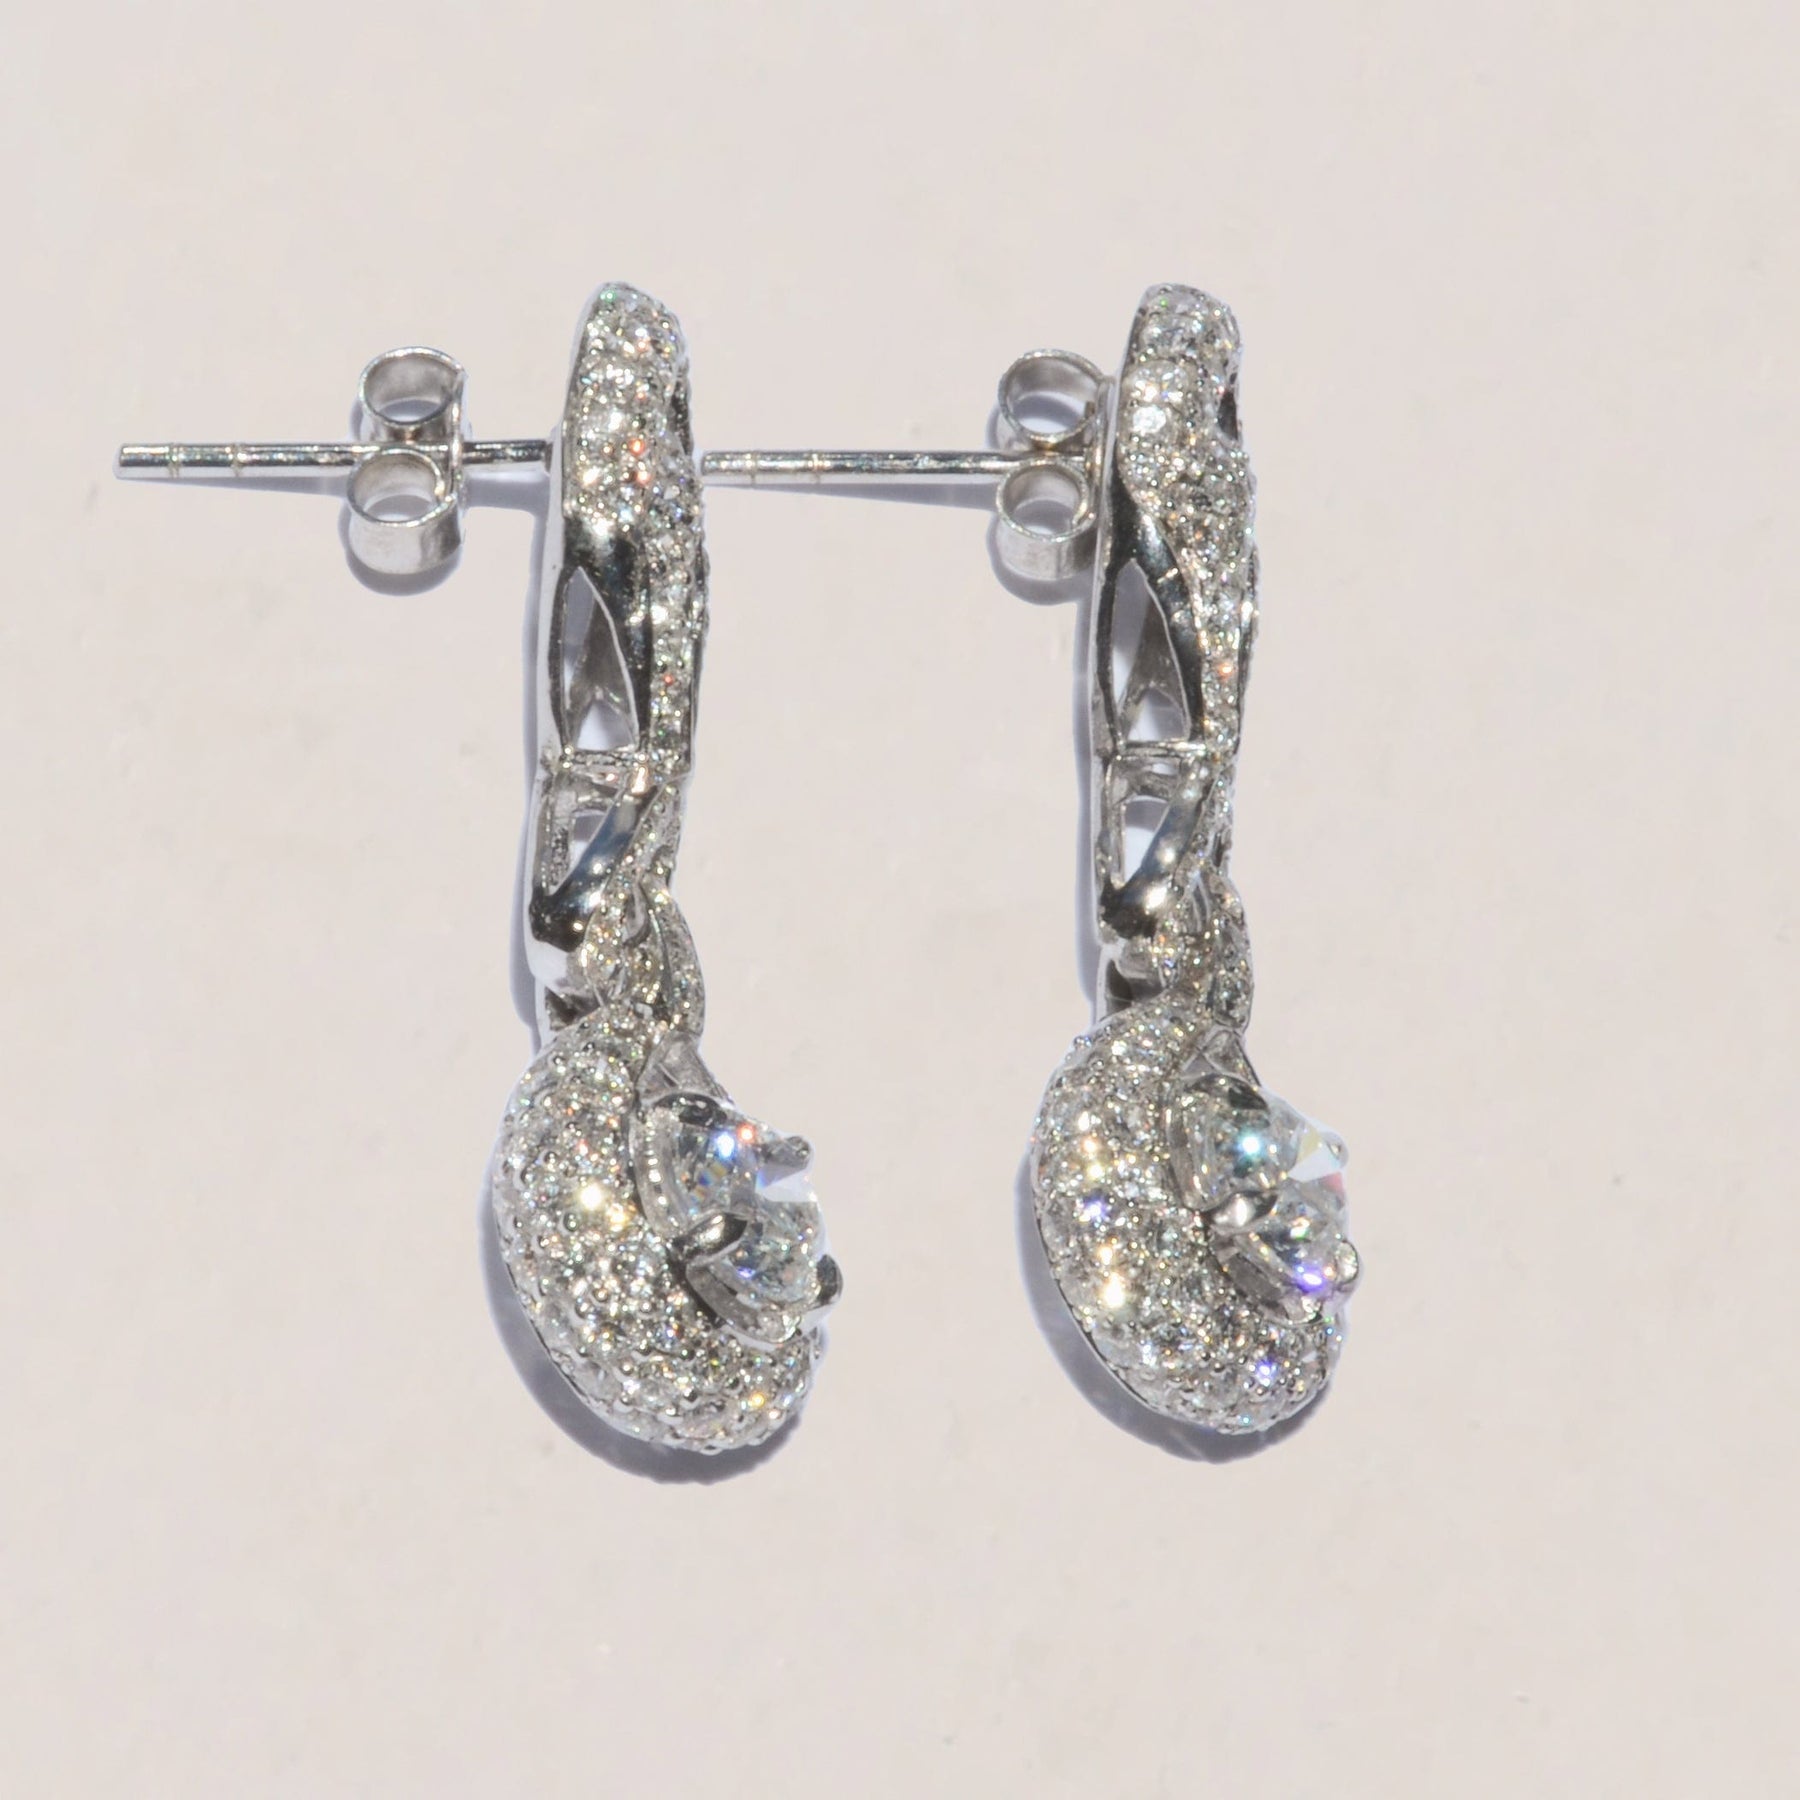 White Gold and Diamond Earrings Custom made by the Master Jeweller